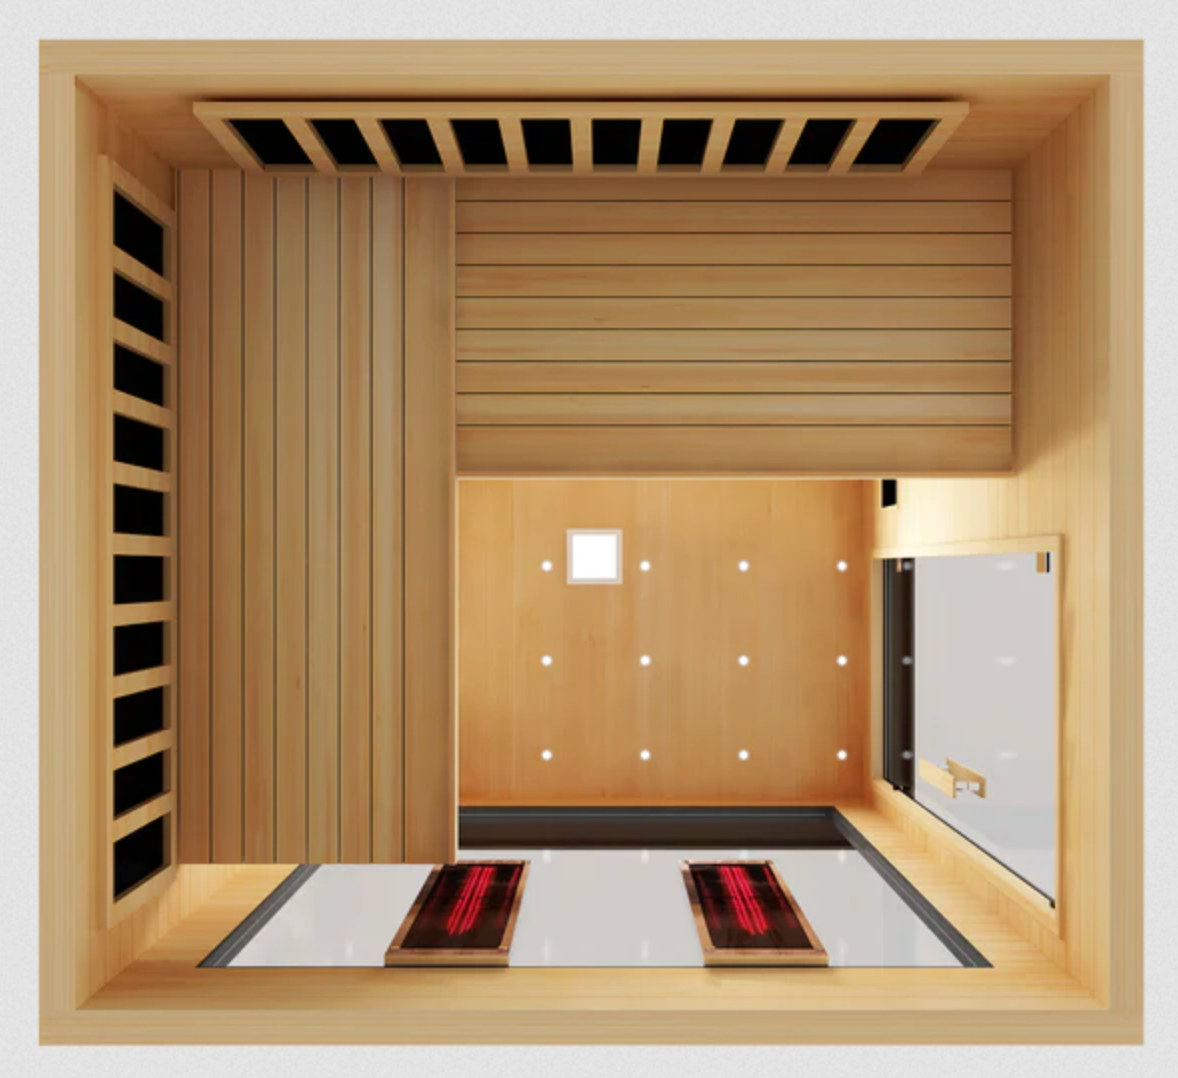 sauna interior showing bench and heater layout